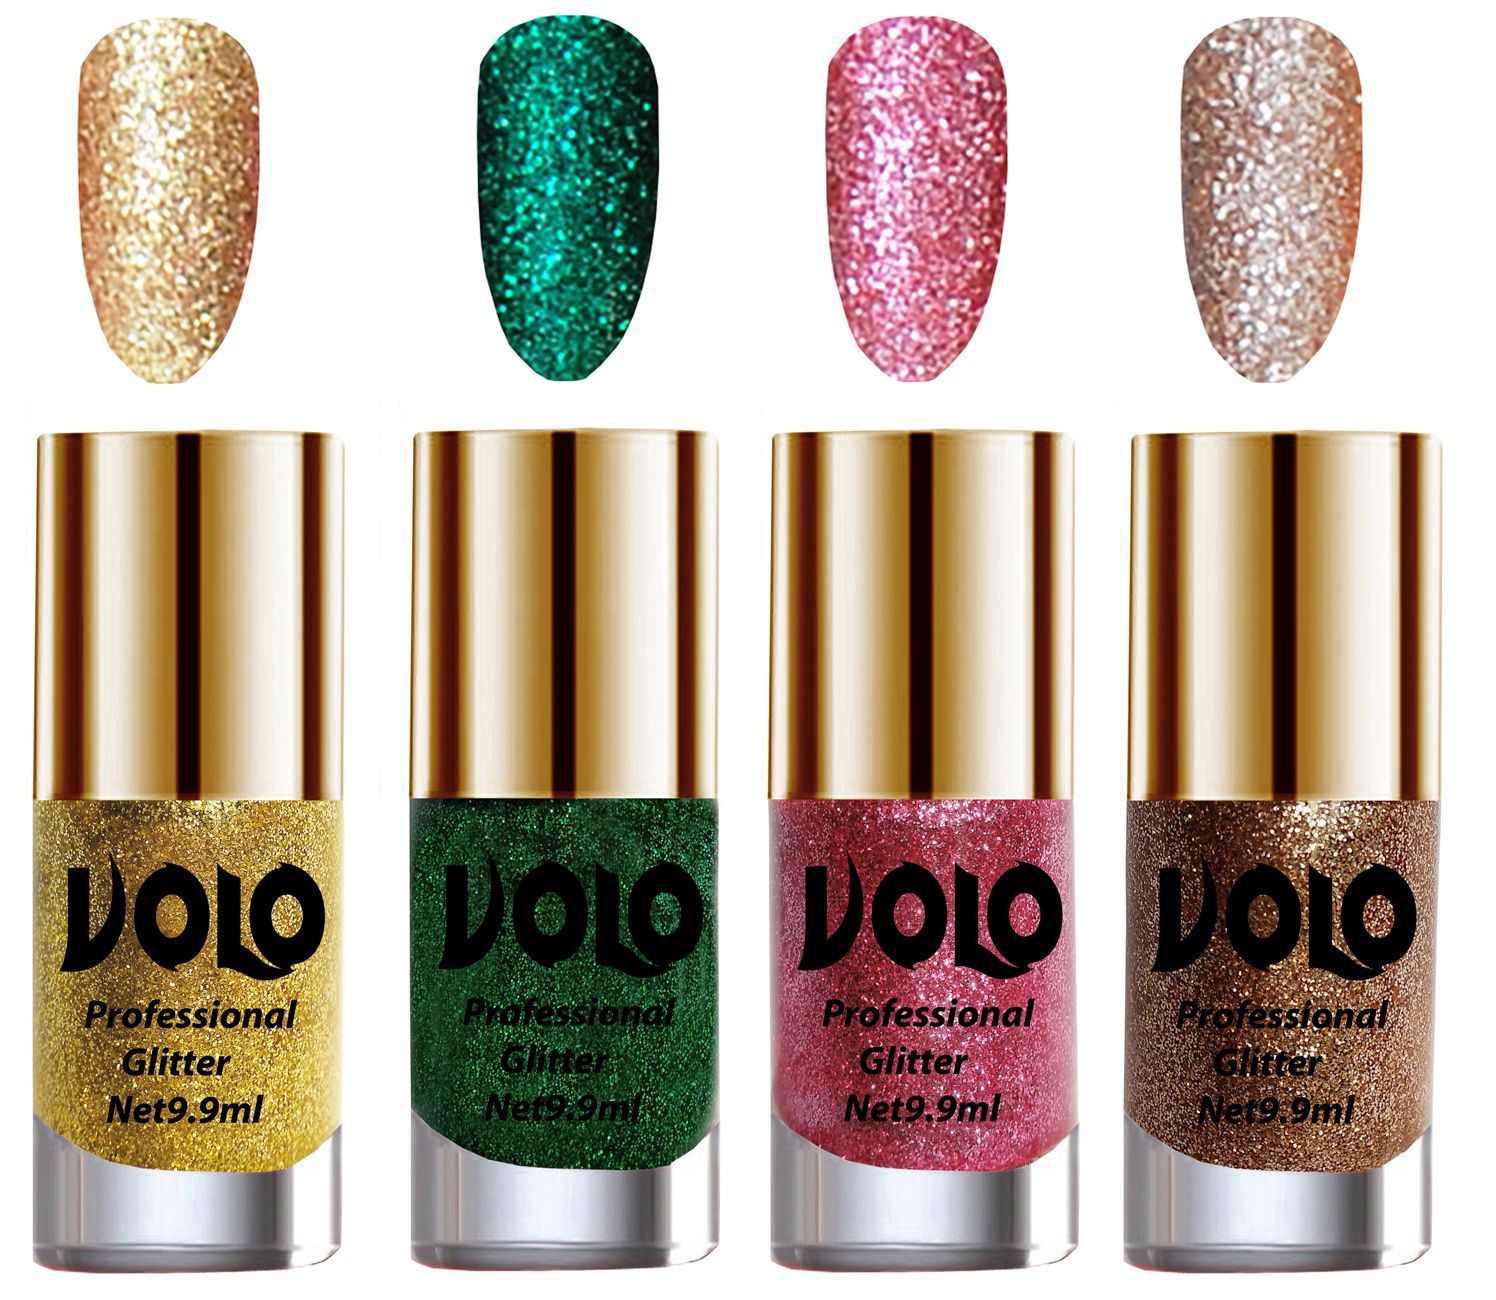     			VOLO Professionally Used Glitter Shine Nail Polish Gold,Green,Pink Gold Pack of 4 39 mL